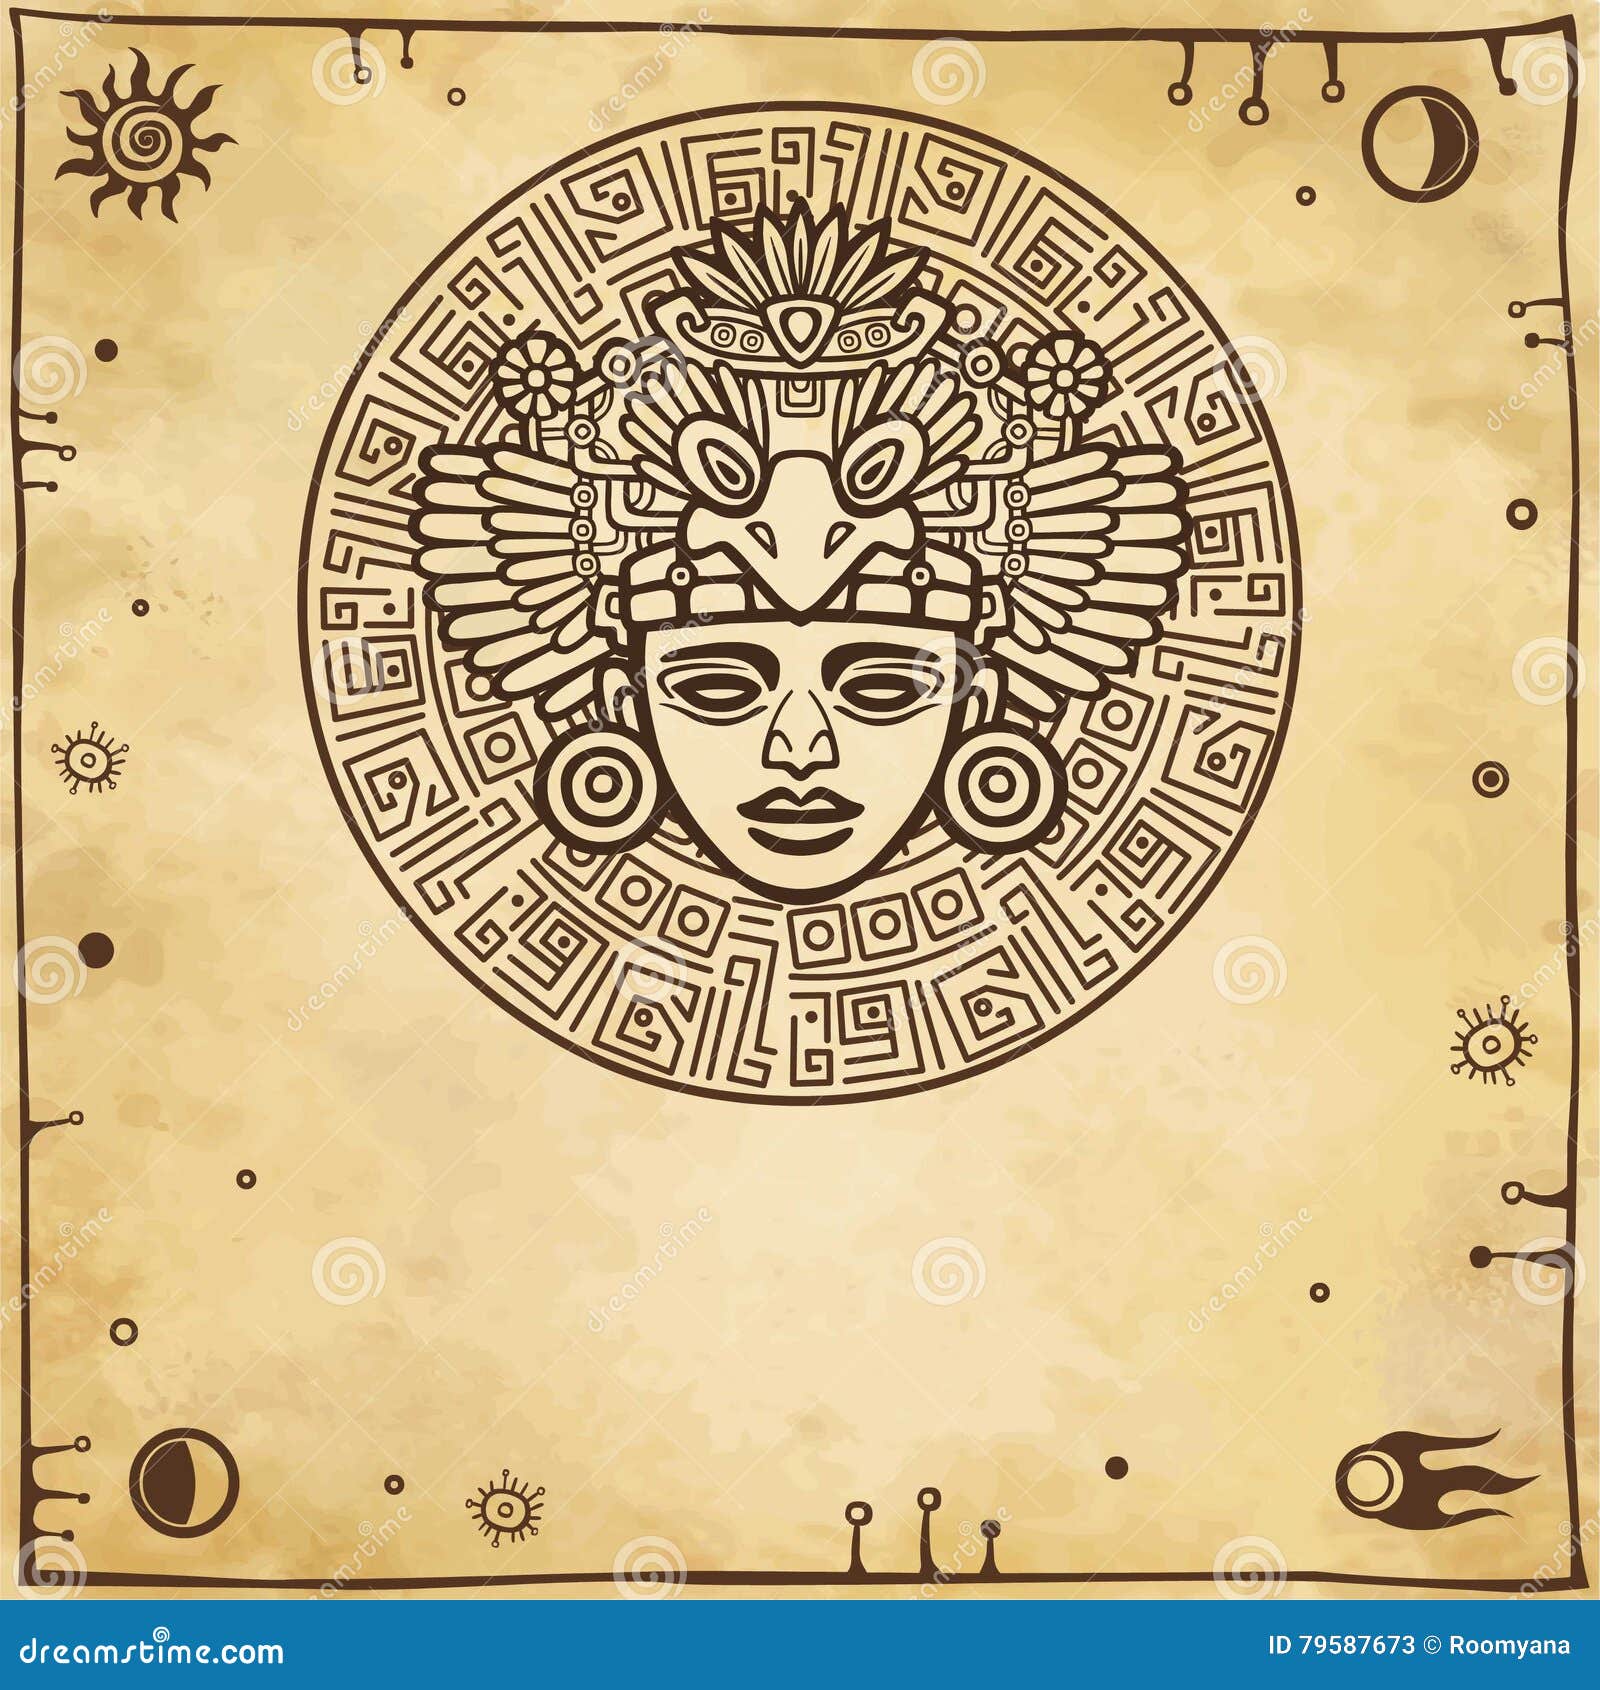 linear drawing: decorative image of an ancient indian deity. space s.